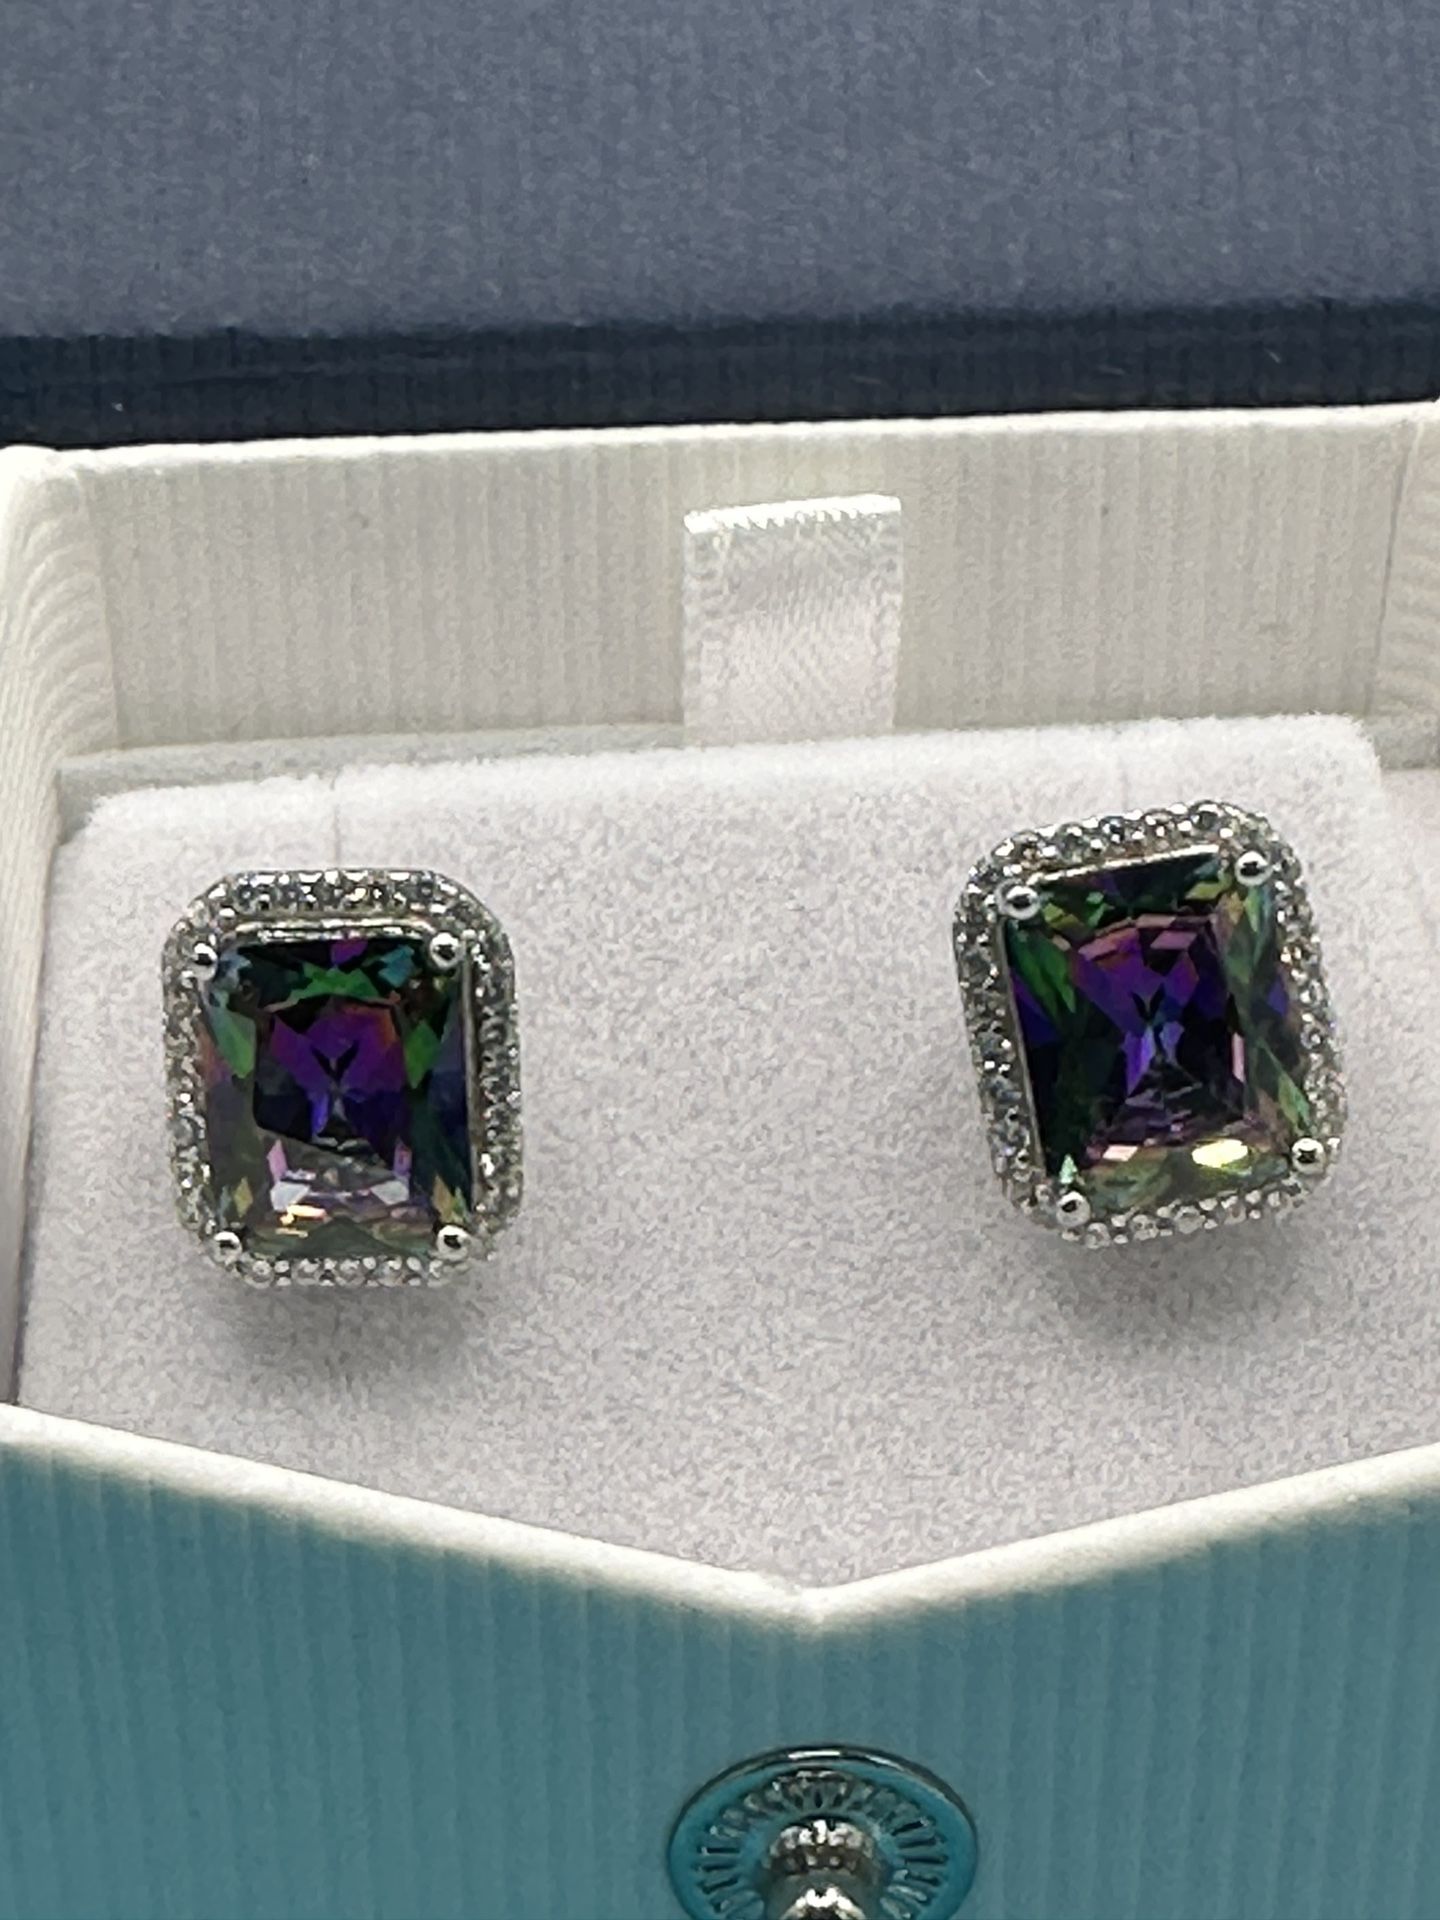 New Radiant Cut 7.35 Ct Mystic Topaz Earrings Rectangular Shaped Weighs 5.57 Grams Pristine 